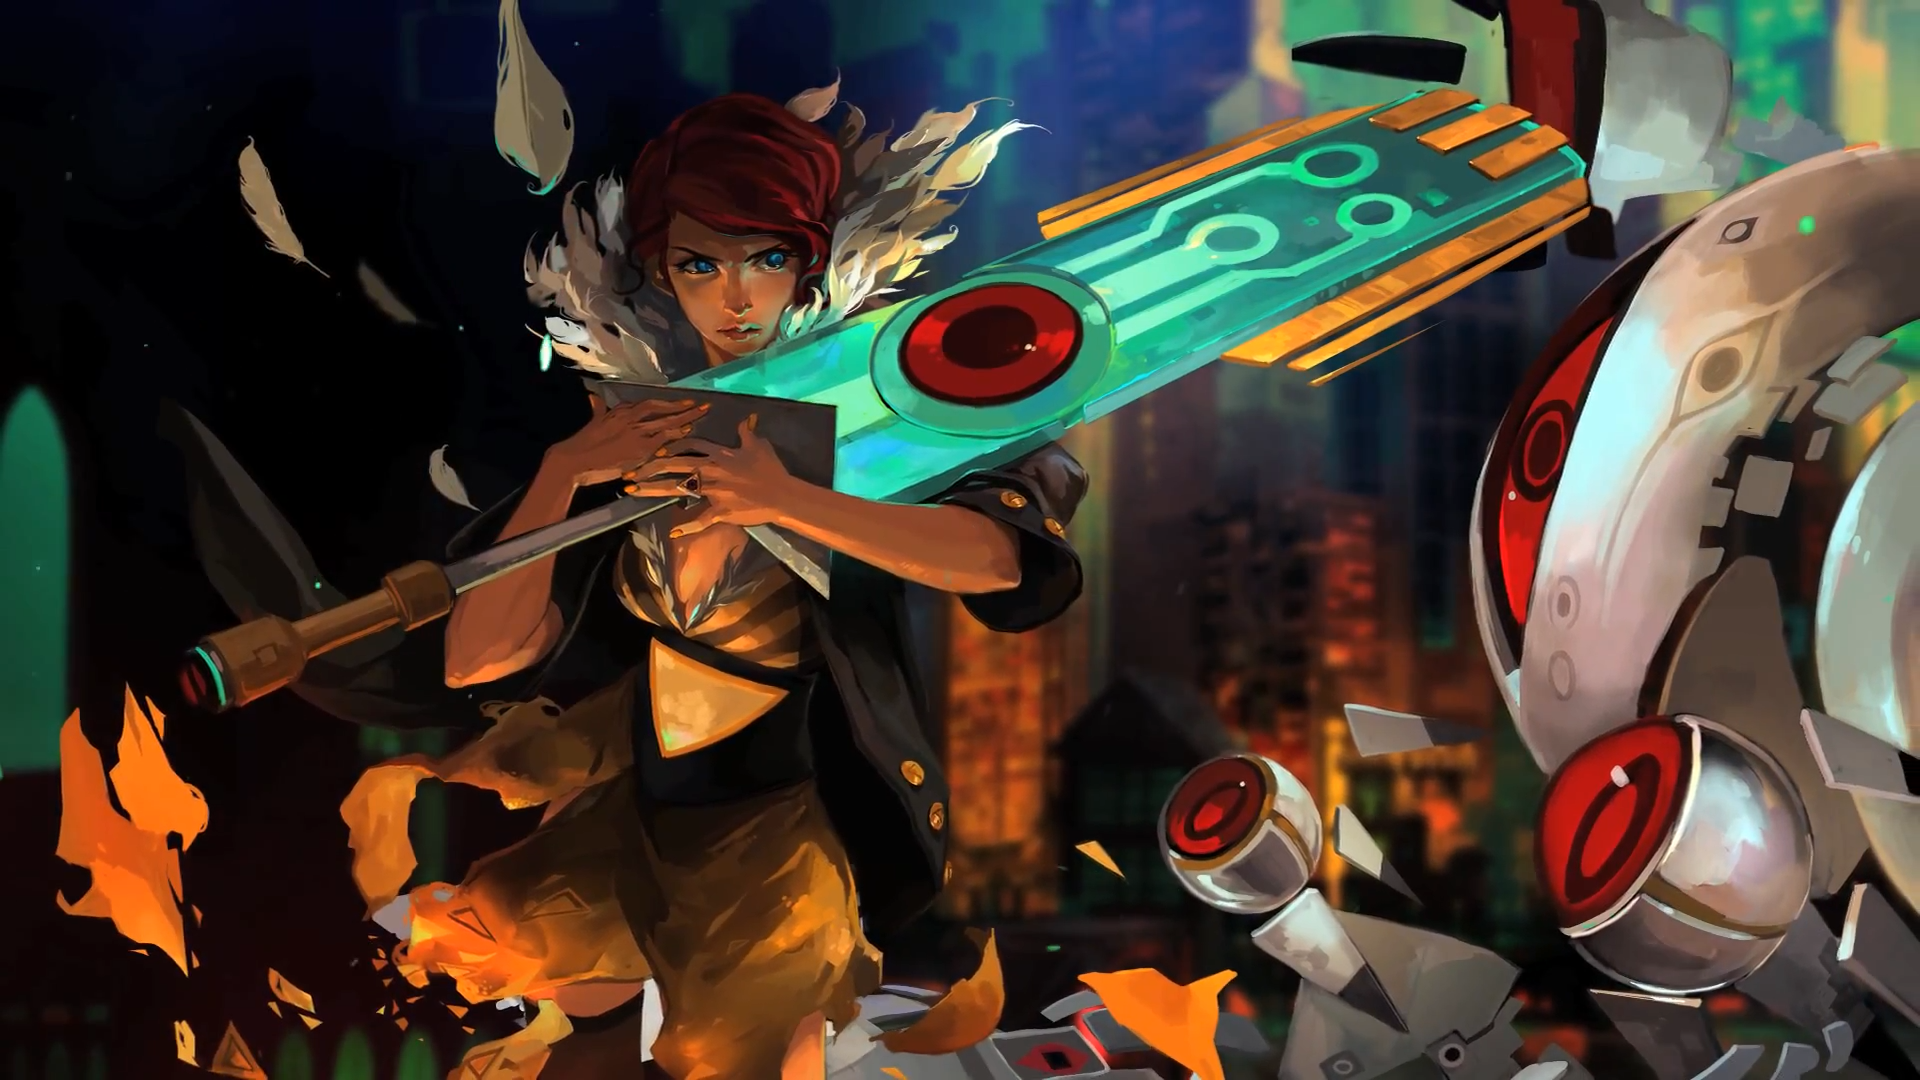 HD desktop wallpaper featuring an animated character from the game Transistor, holding a futuristic sword, with a vibrant, fiery backdrop.